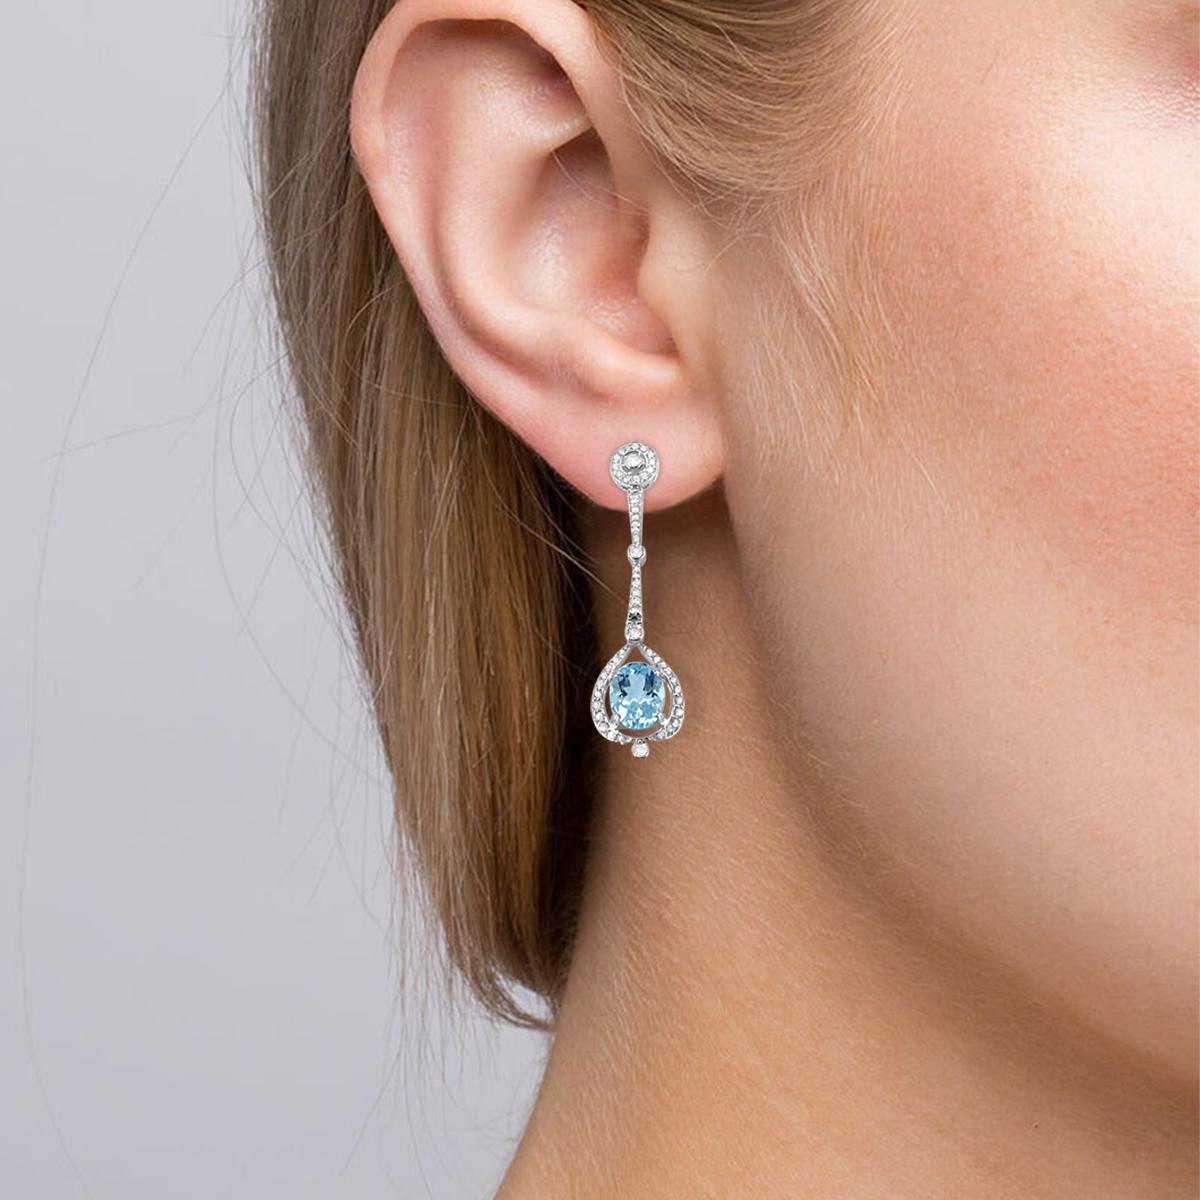 Modern 14K White Gold 4.63cts Aquamarine and Diamond Earring, Style# E5199AQ For Sale